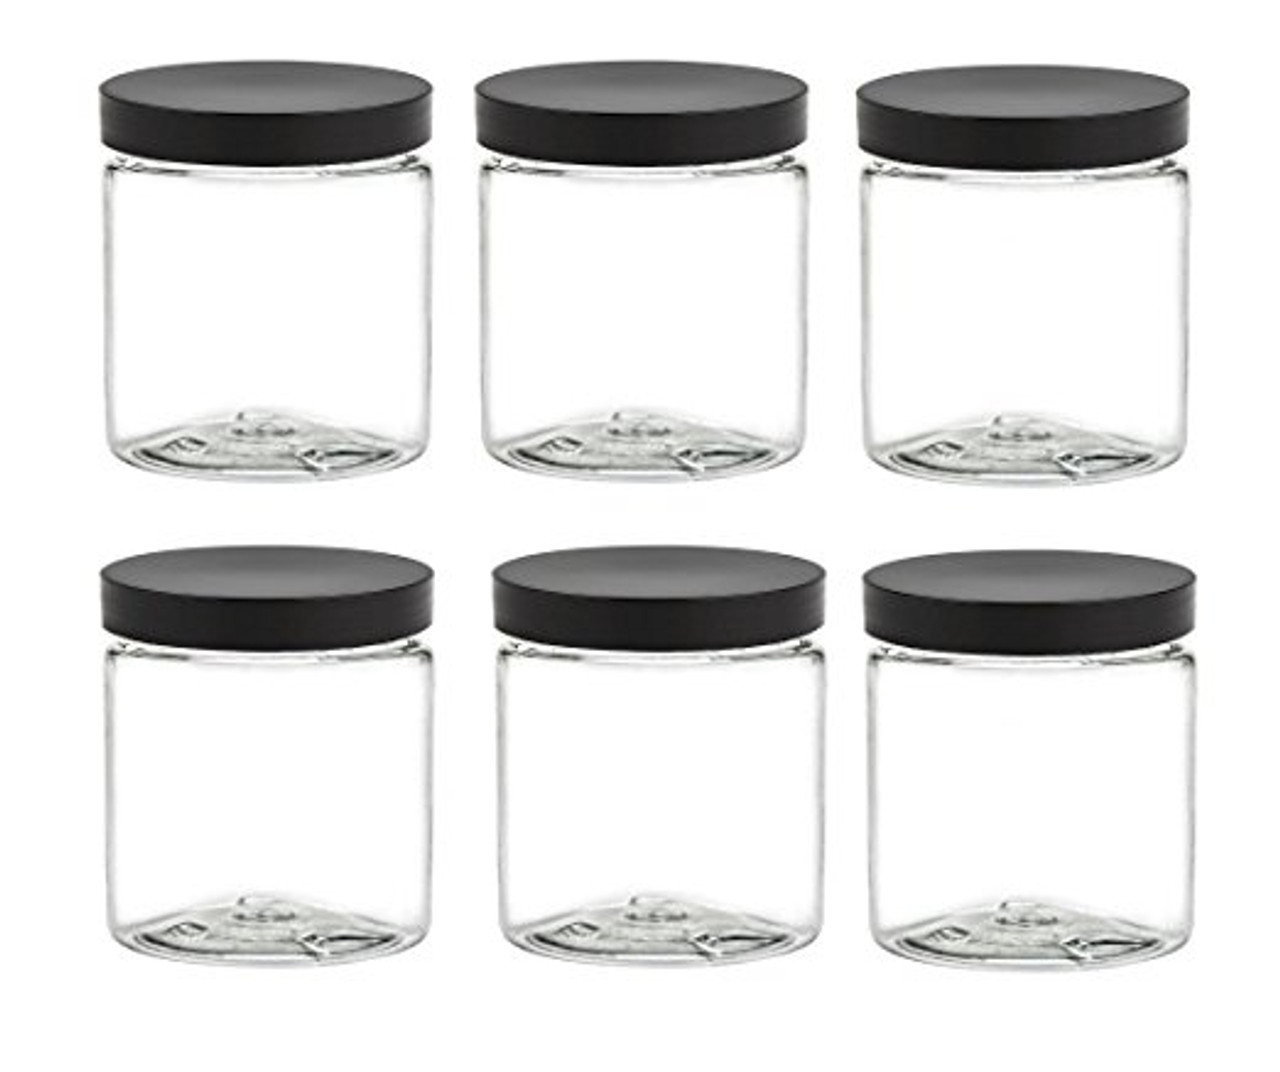 RoyalHouse - 12 PACK - 9.5 Oz with Red Cap - Plastic Jars Bottles  Containers - Perfect for Storing Spice, Herbs and Powders - Lined Cap -  Safe Plastic